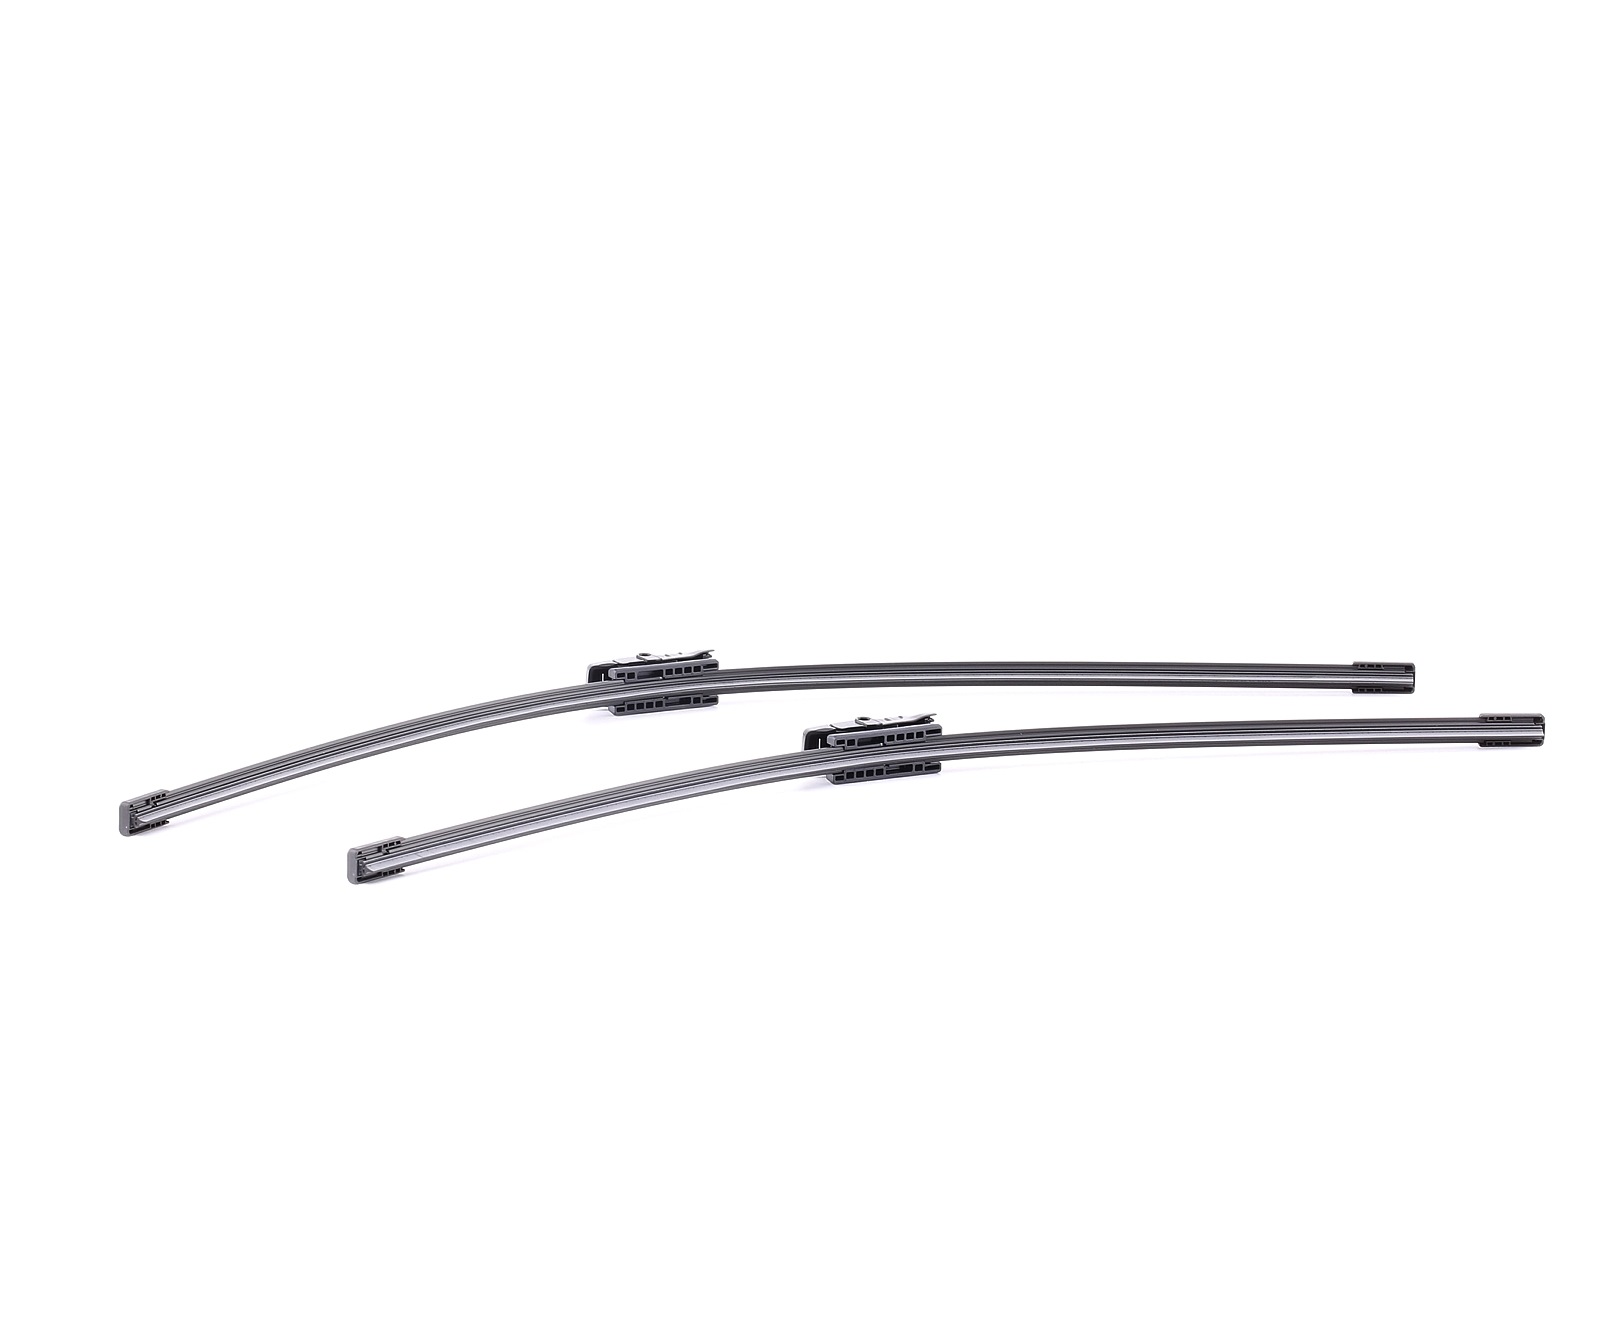 BOSCH Essuie-Glaces OPEL,FORD,RENAULT 3 397 014 492 Balai d'Essuie-Glace